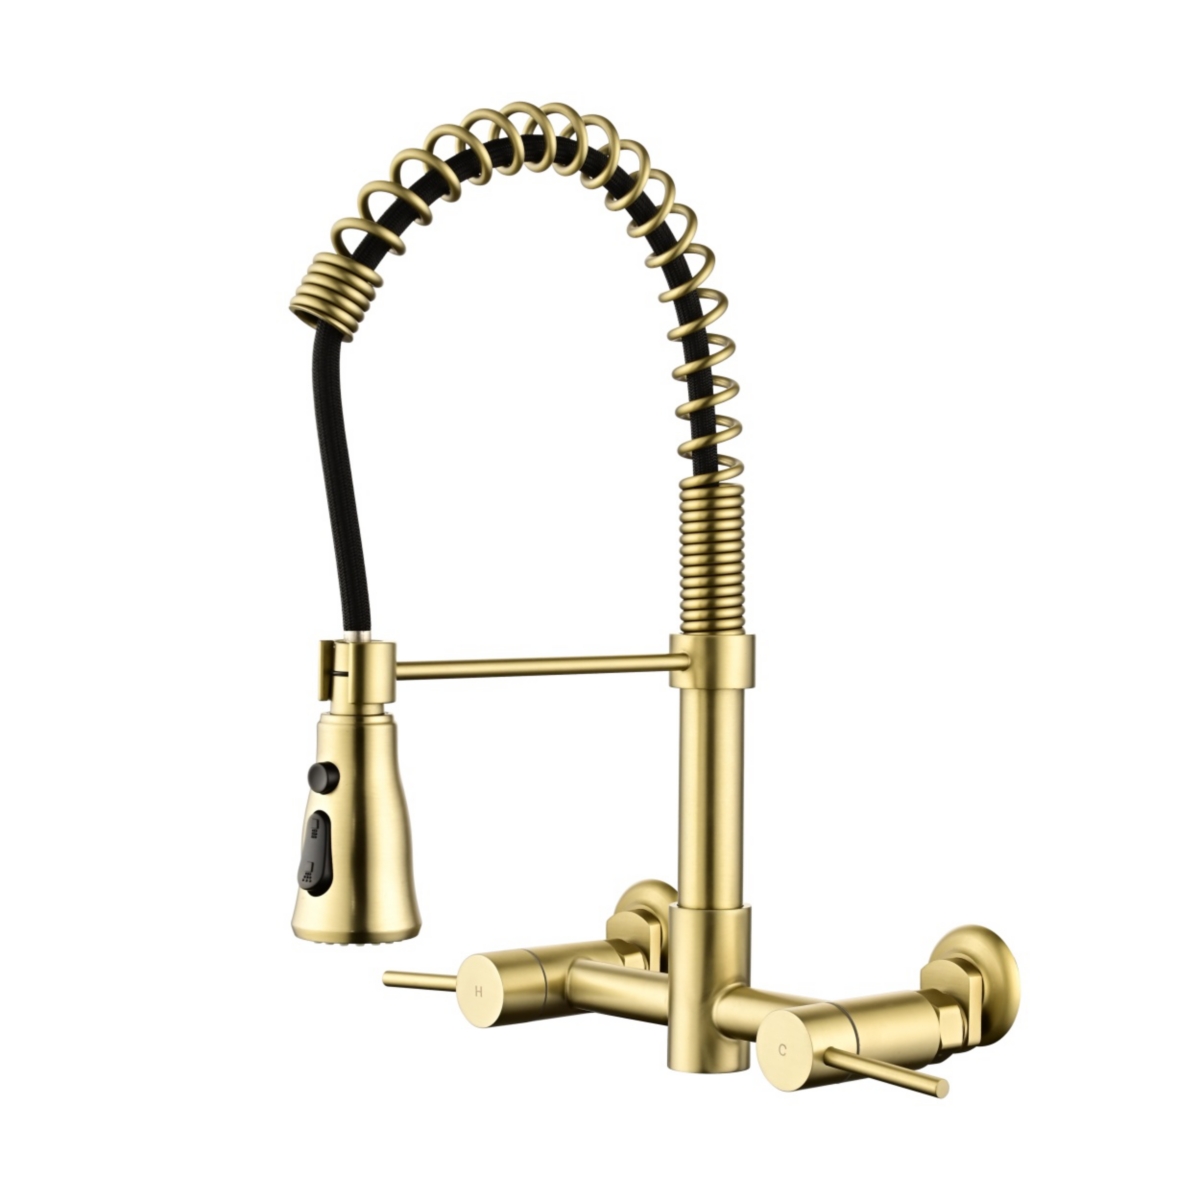 3 Functions Wall Mounted Bridge Kitchen Faucet - Gold